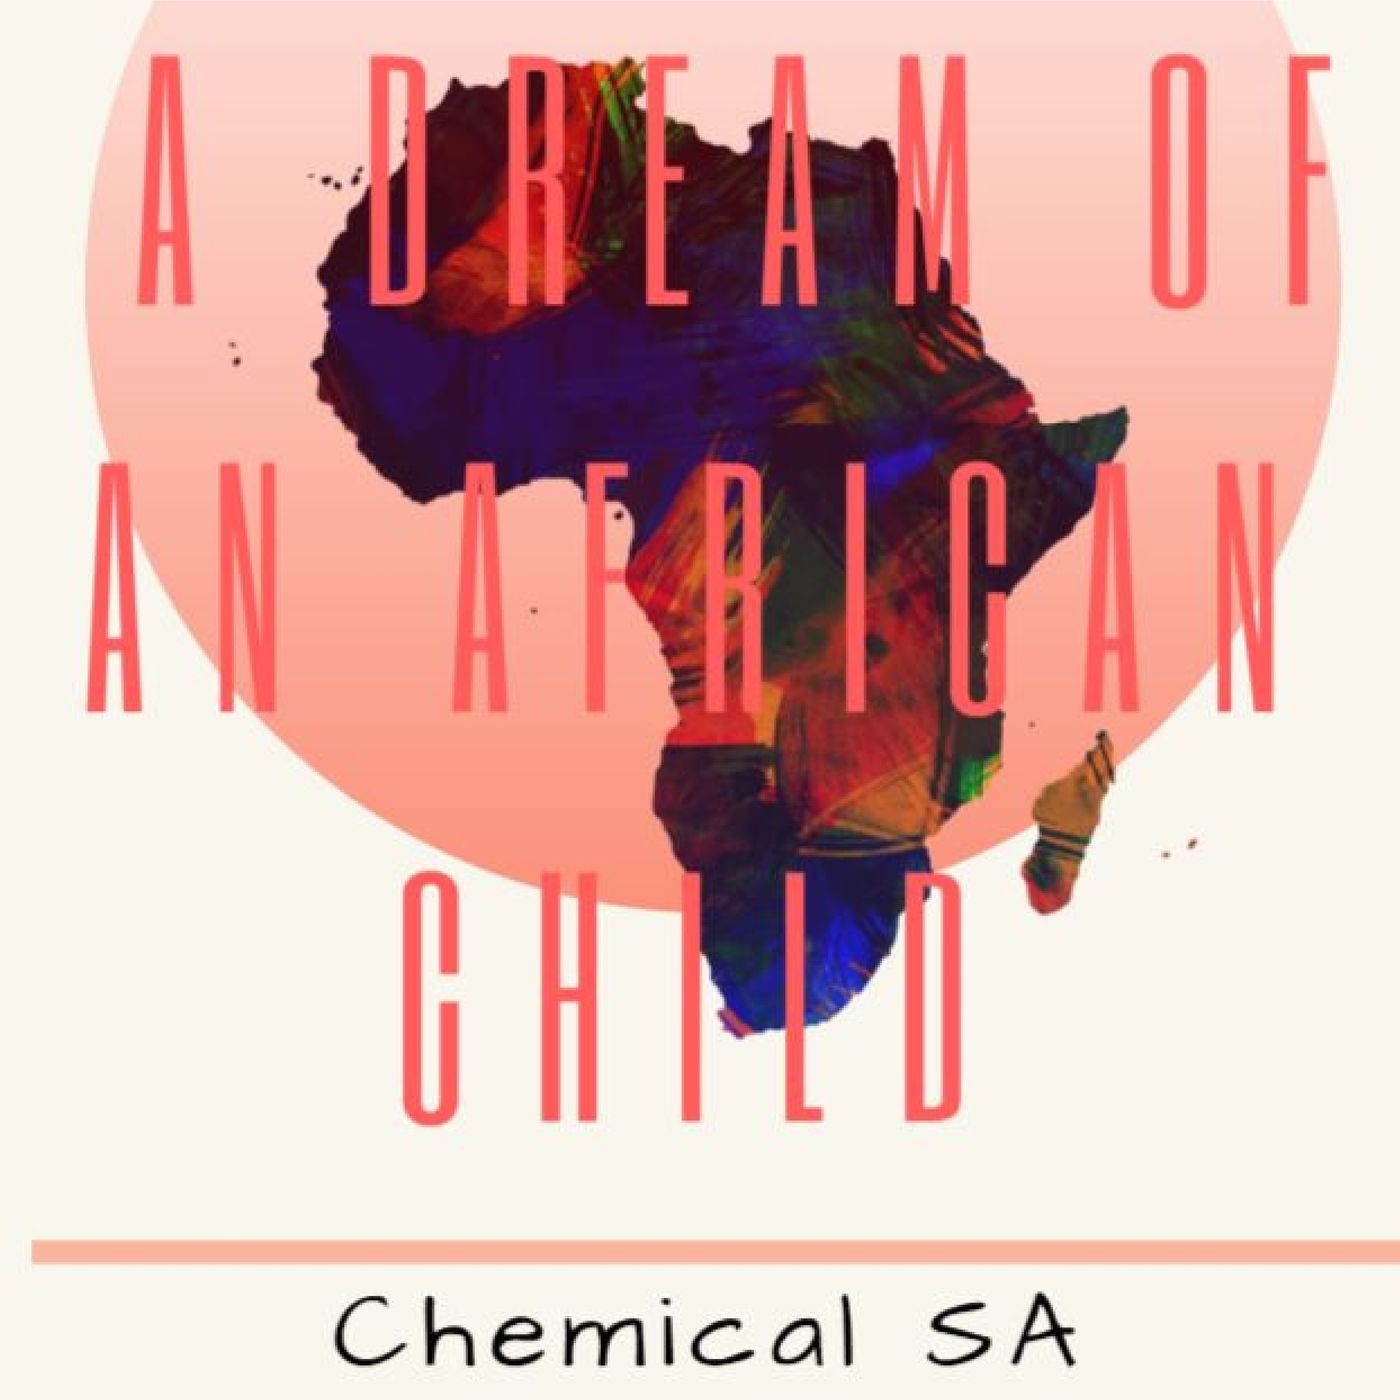 Chemical Sa - A Dream of An African Child / Studio 1 Eleven Records